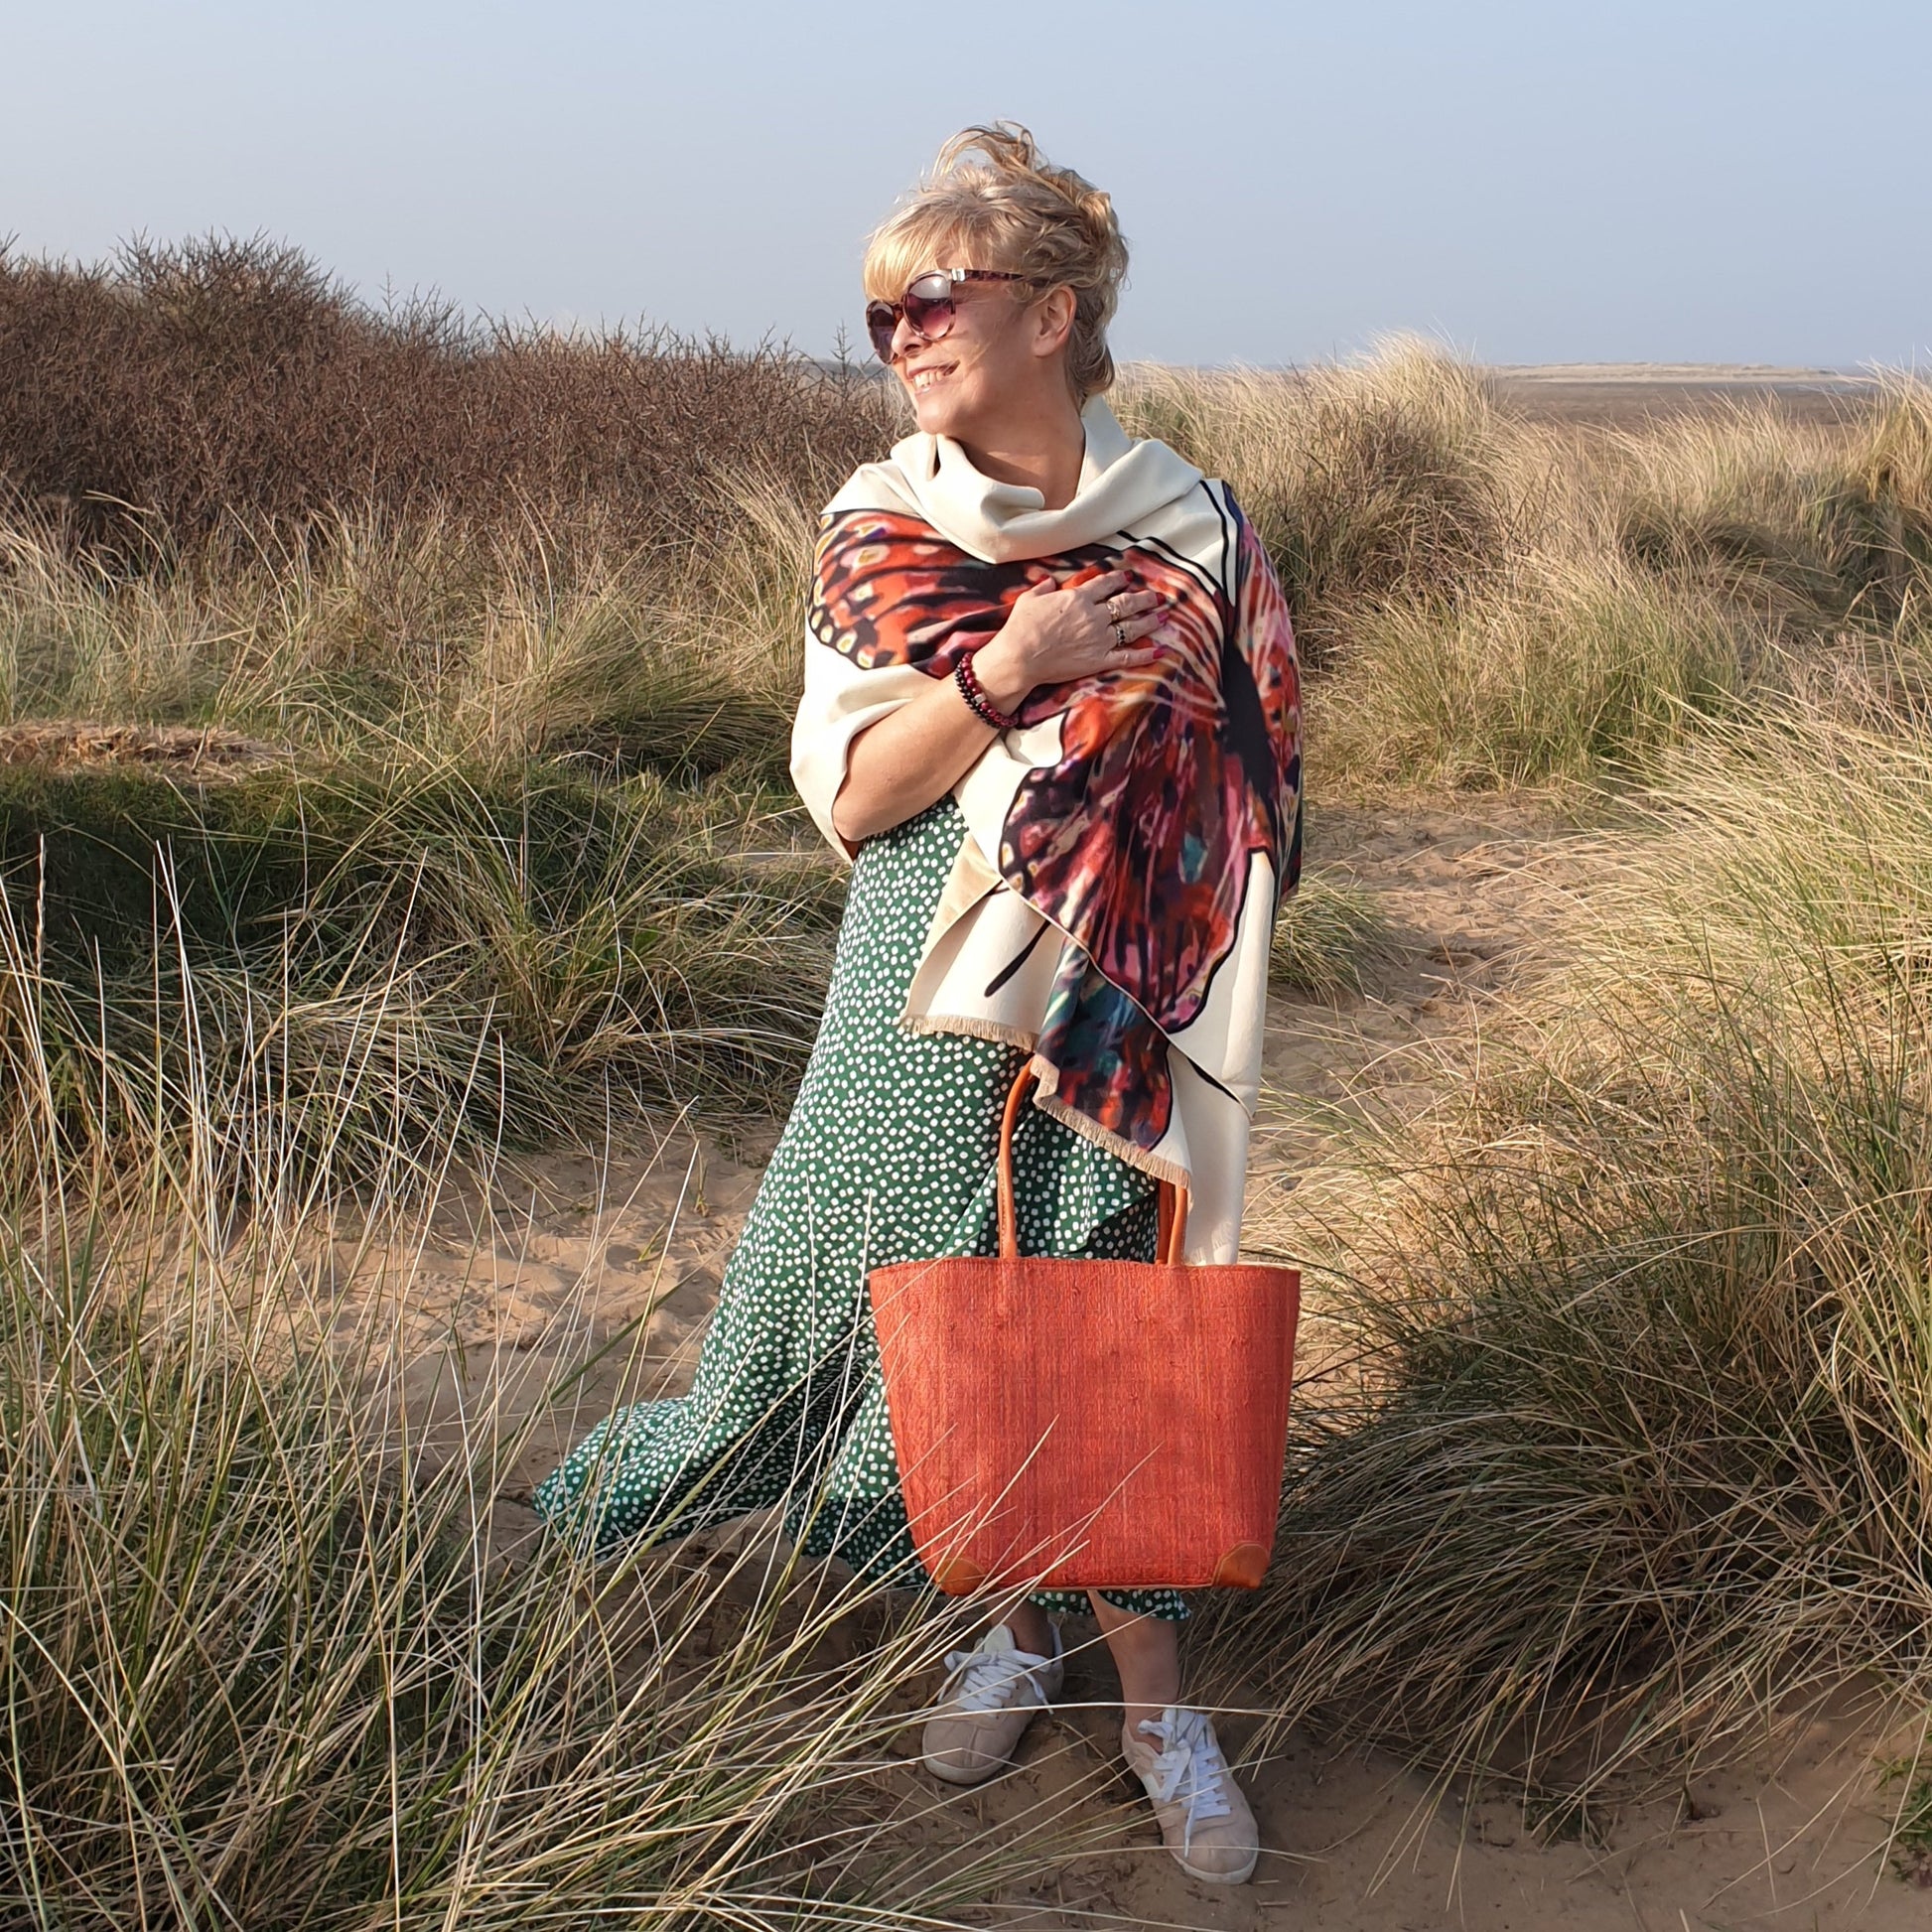 Lady on the beach carrying a red raffia basket 